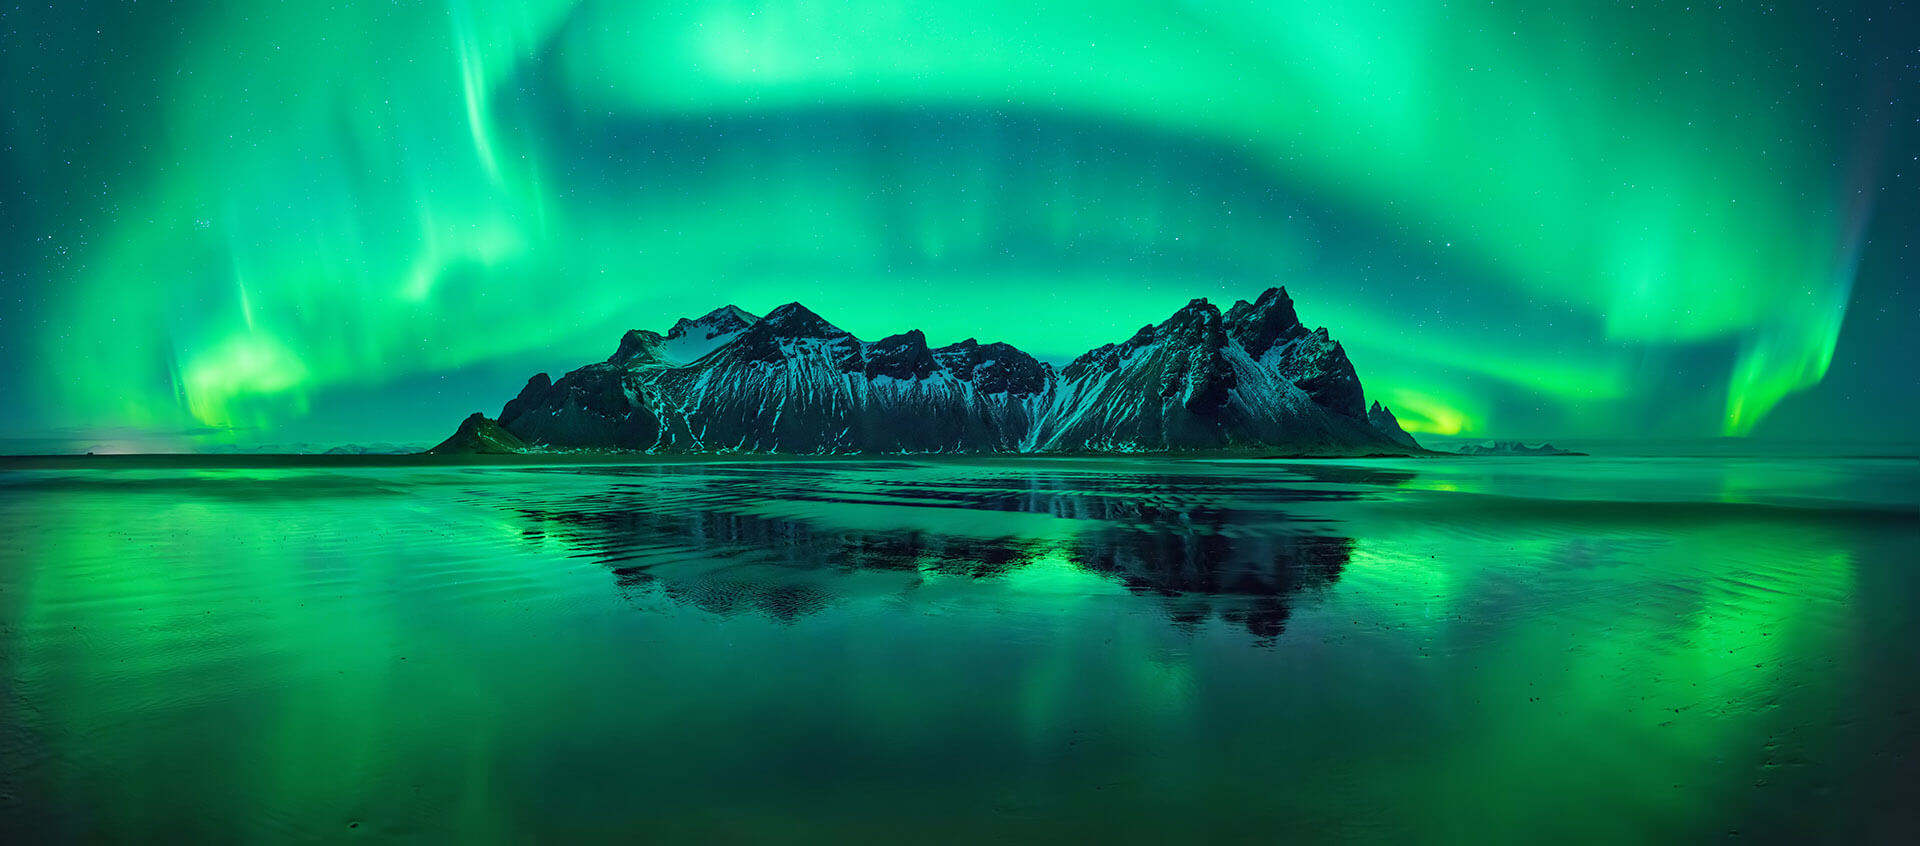 A tall and snowy mountain in Iceland surrounded by a beautiful ocean being cruised by Sky Bird Travel & Tours Sky Vacations. In the background, the beautiful natural phenomenon of the aurora borealis, or the northern lights, brightens the night sky with green hues.